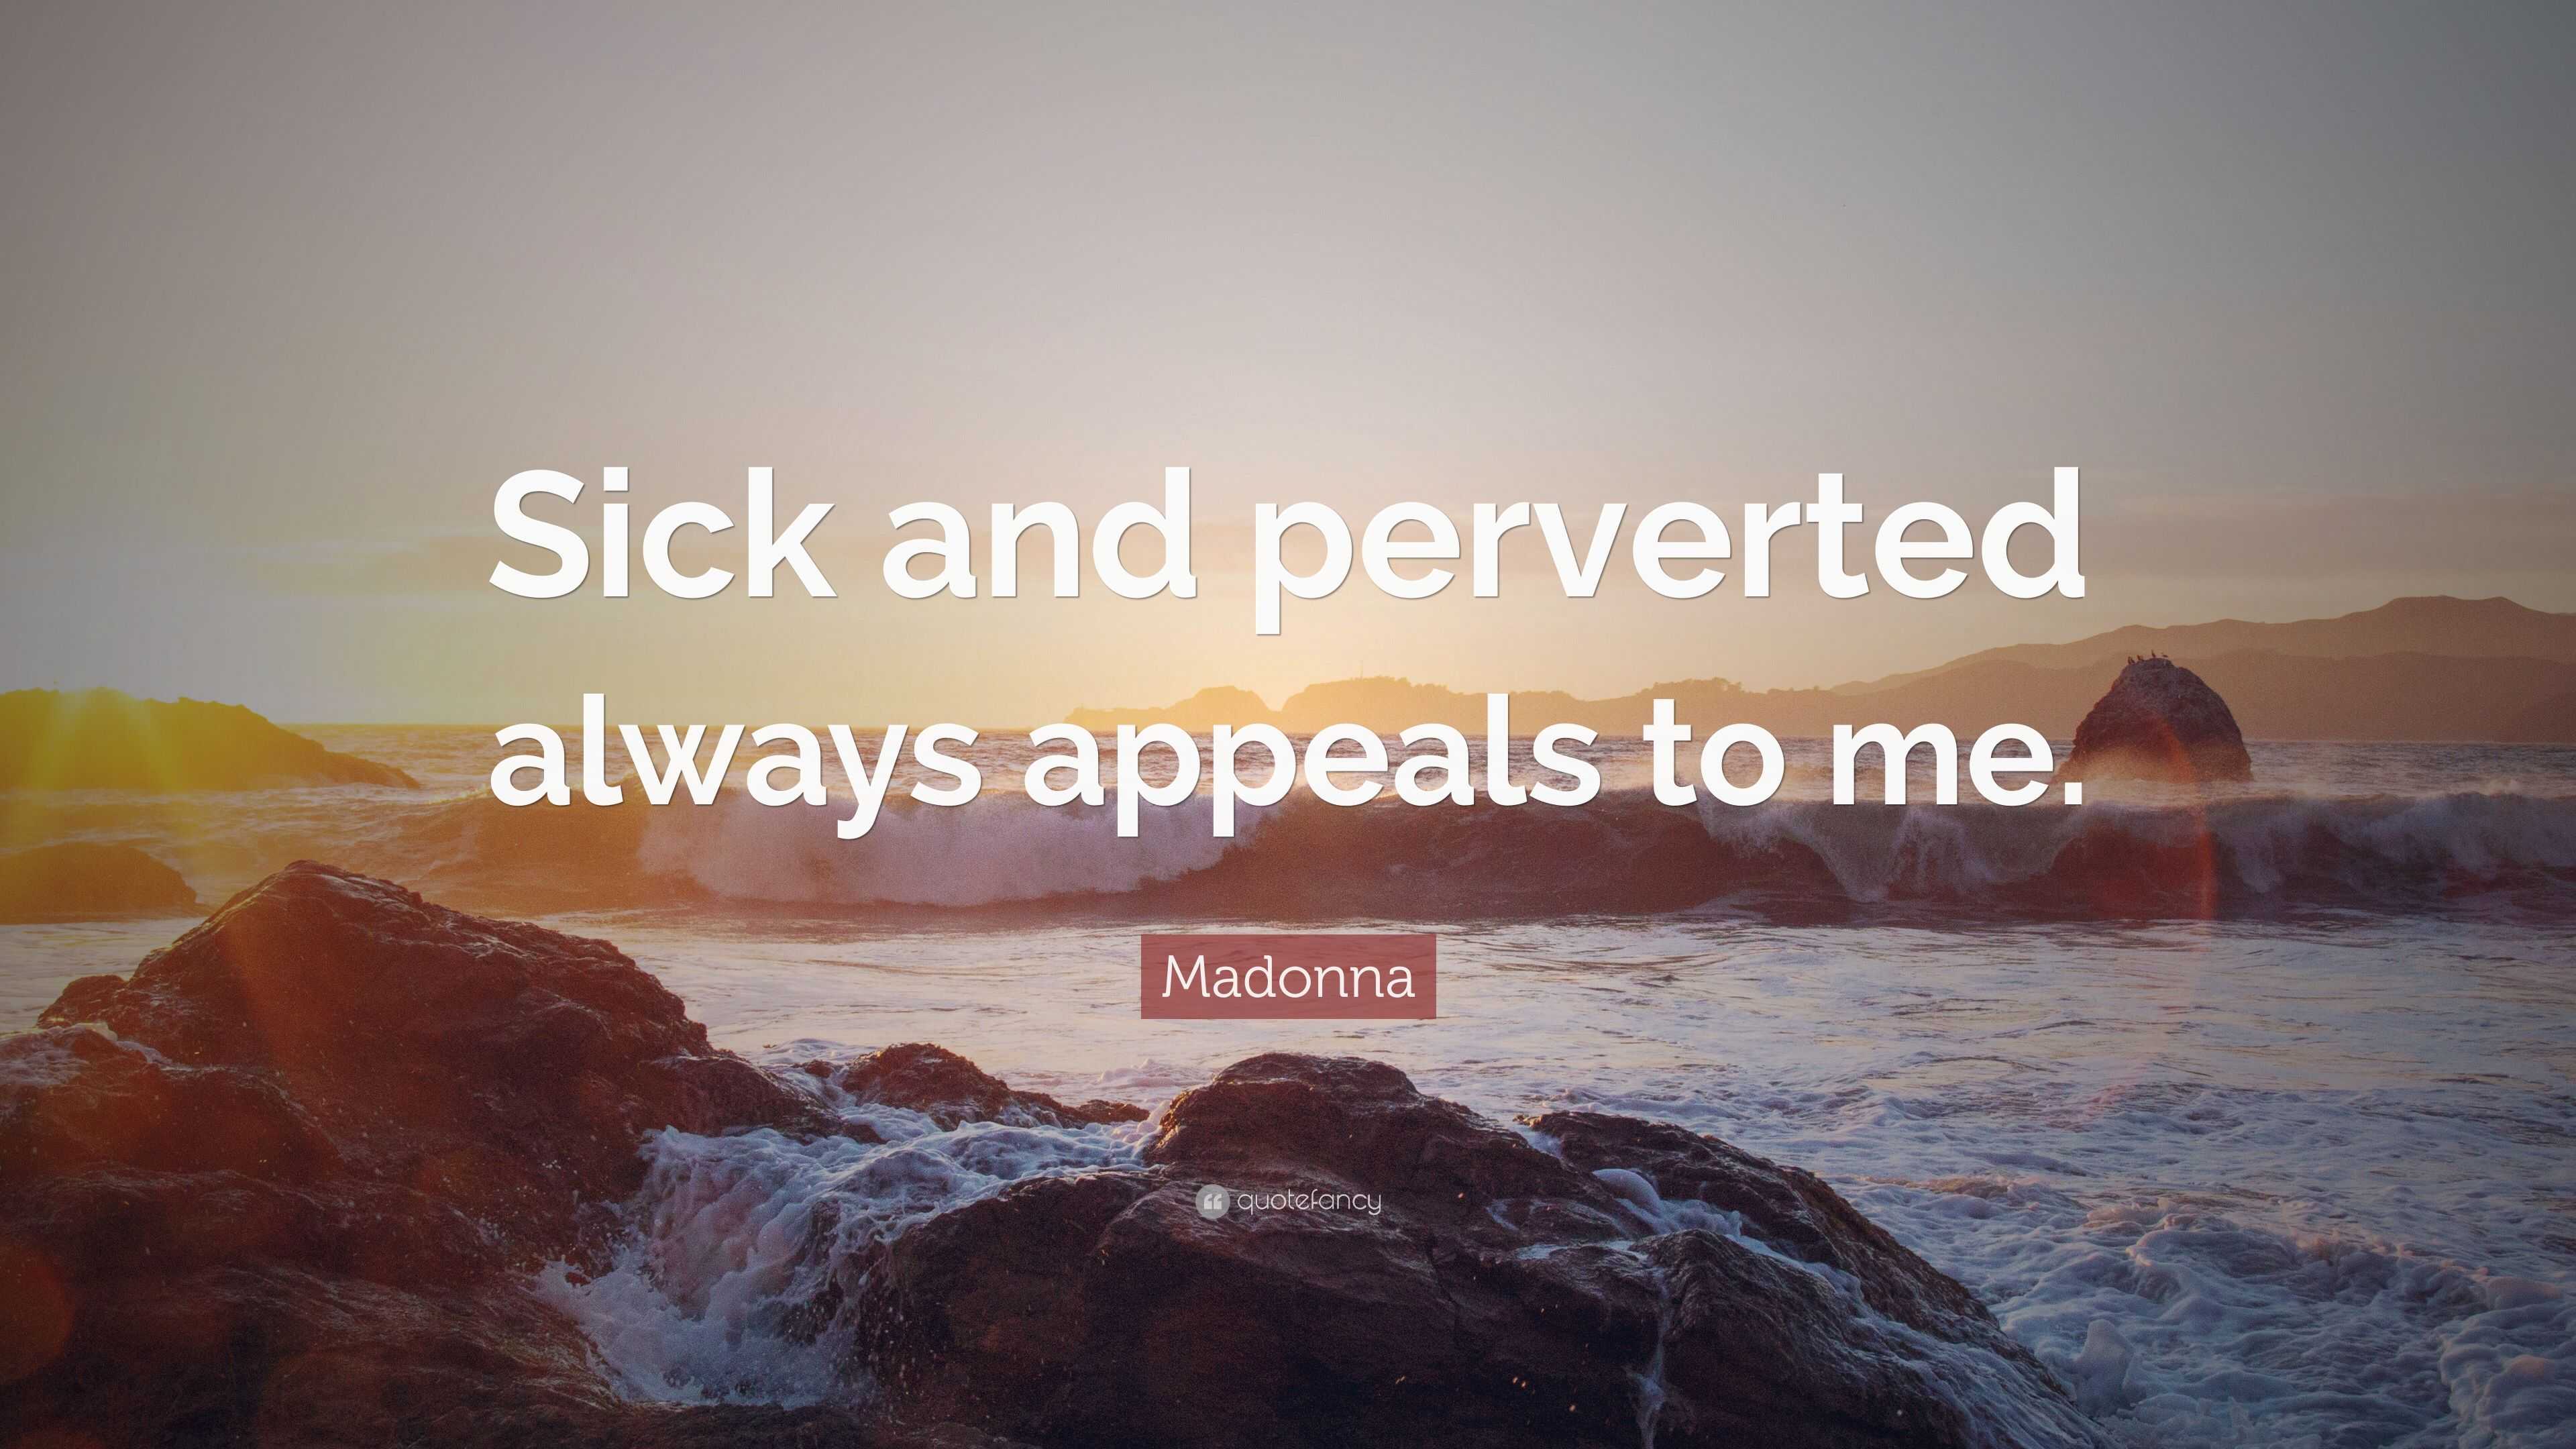 Madonna Quote “Sick and perverted always appeals to me.”